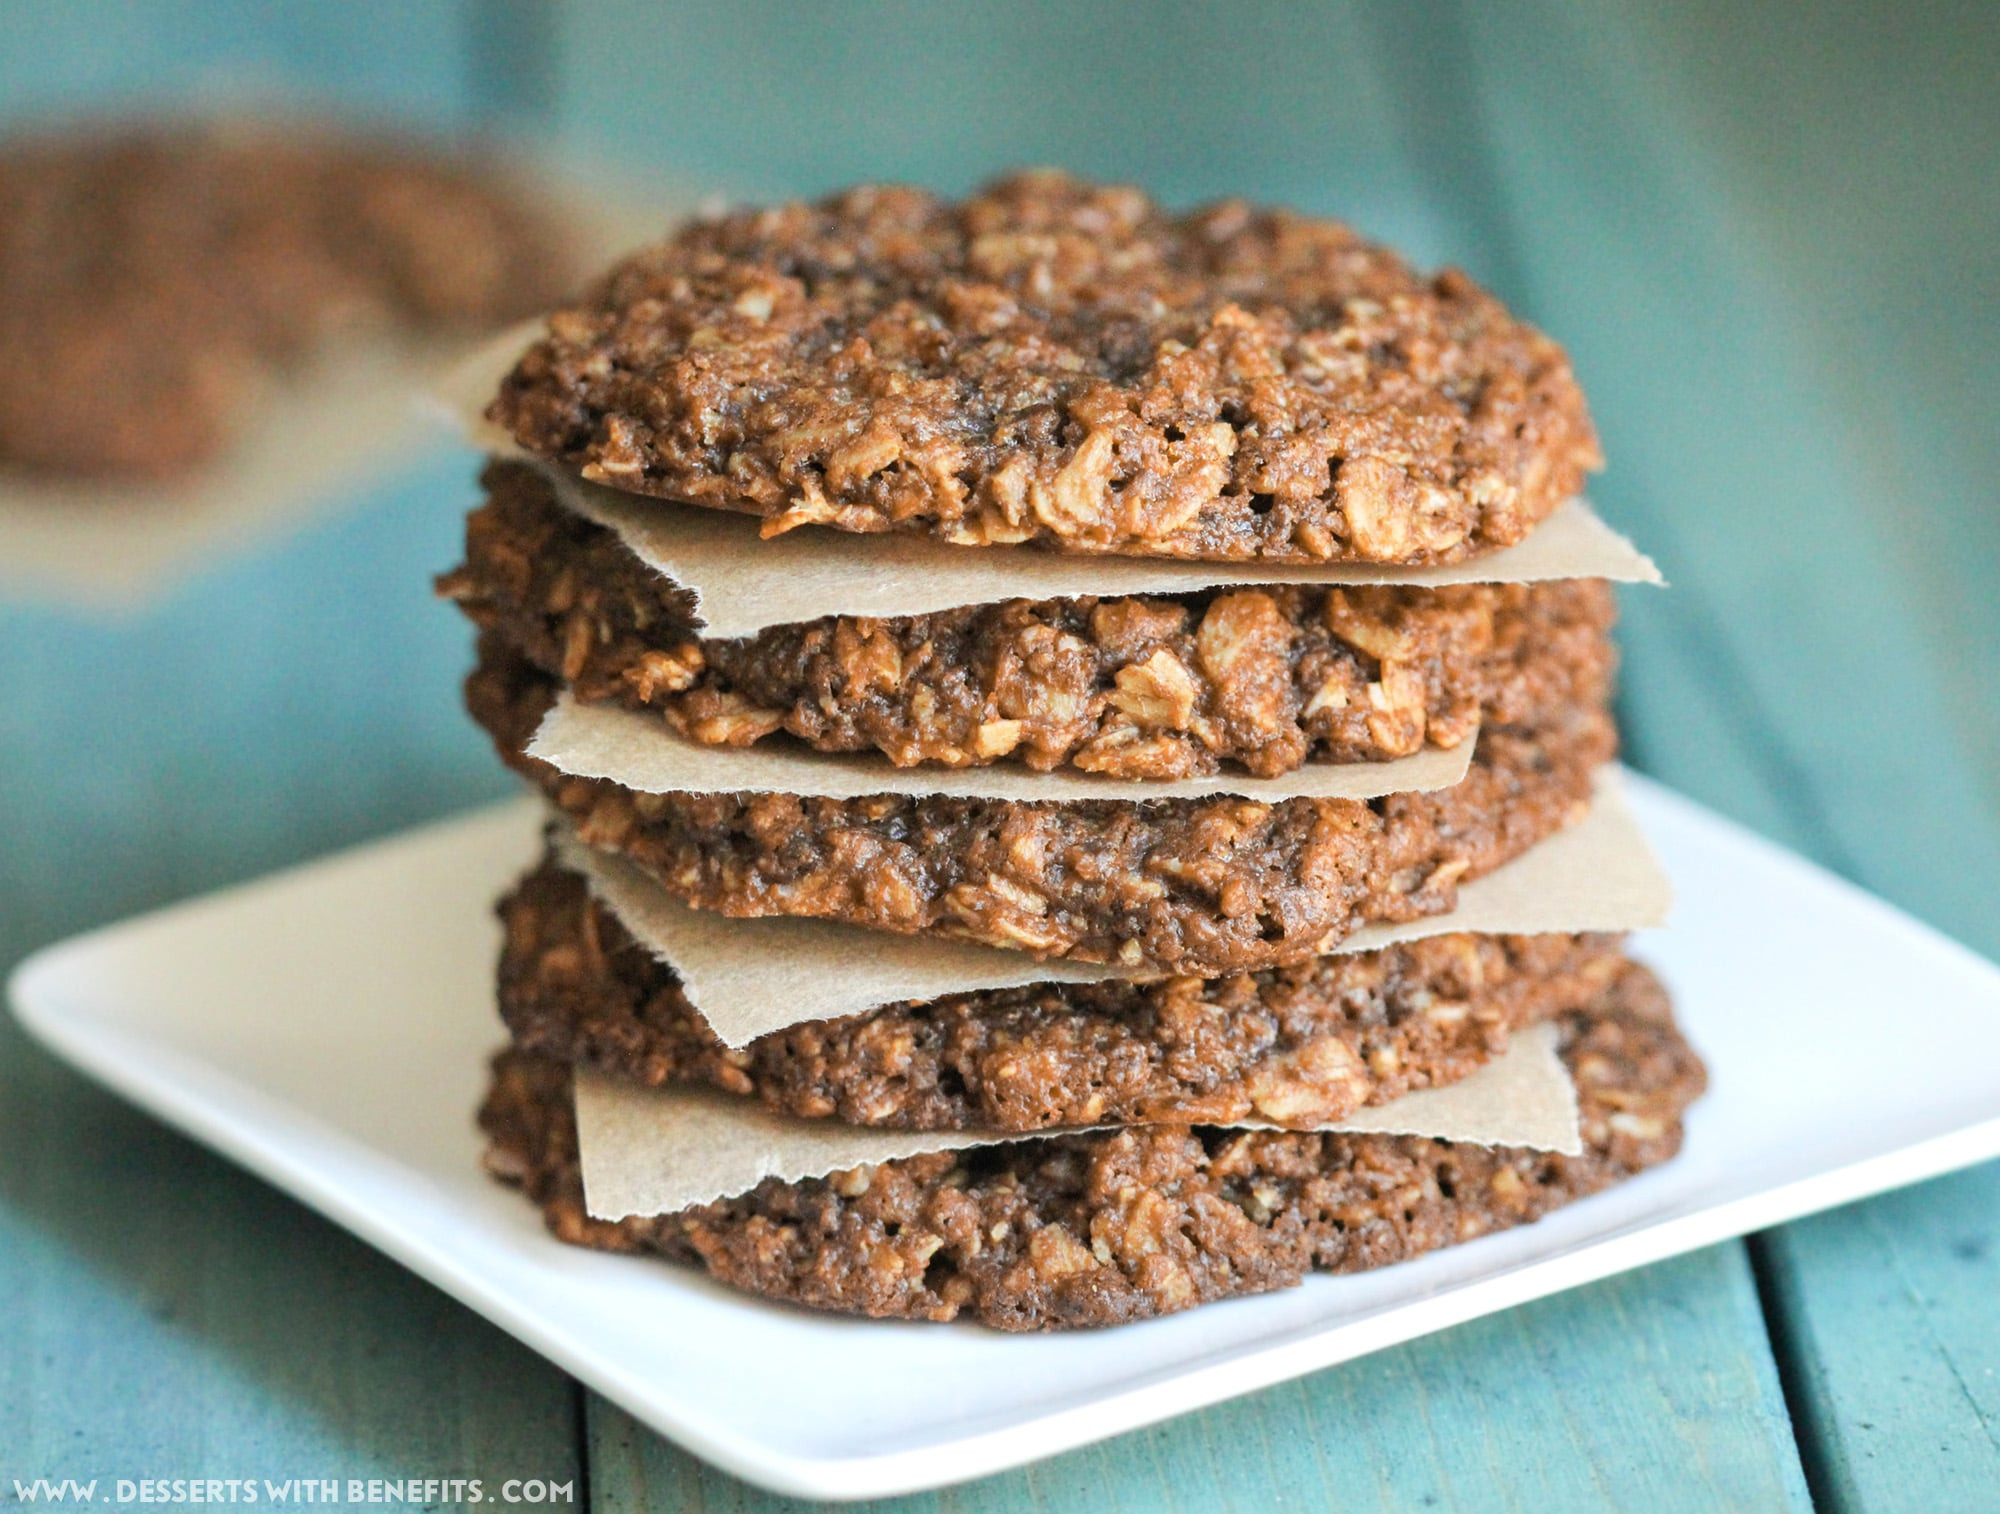 Healthy Oatmeal Peanut Butter Cookies
 Healthy Chewy Peanut Butter Oatmeal Cookies recipe gluten